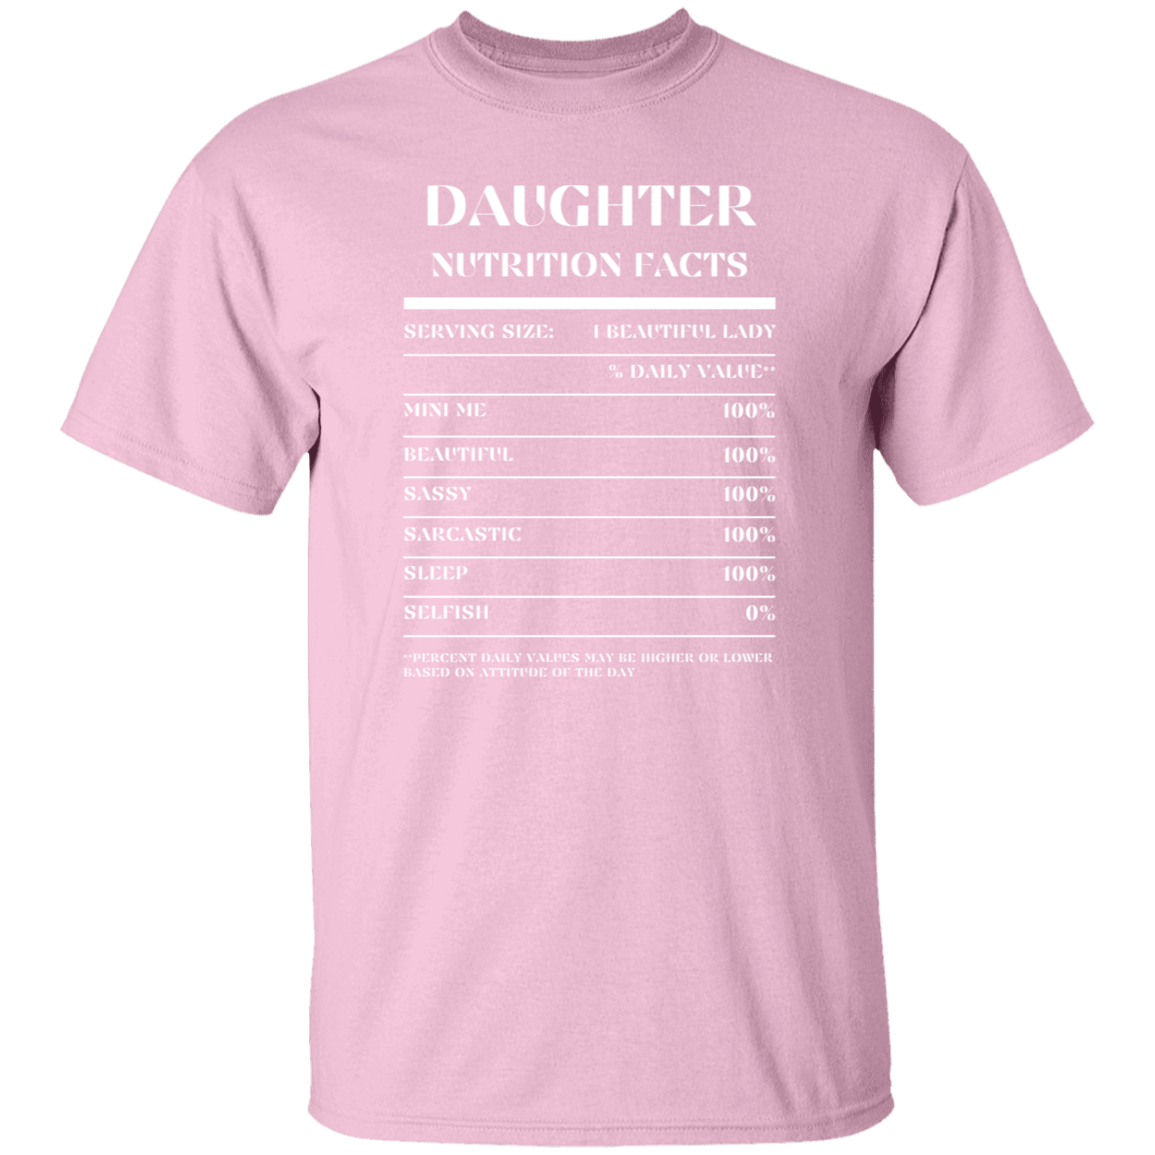 Nutrition Facts T-Shirt SS - Daughter - White